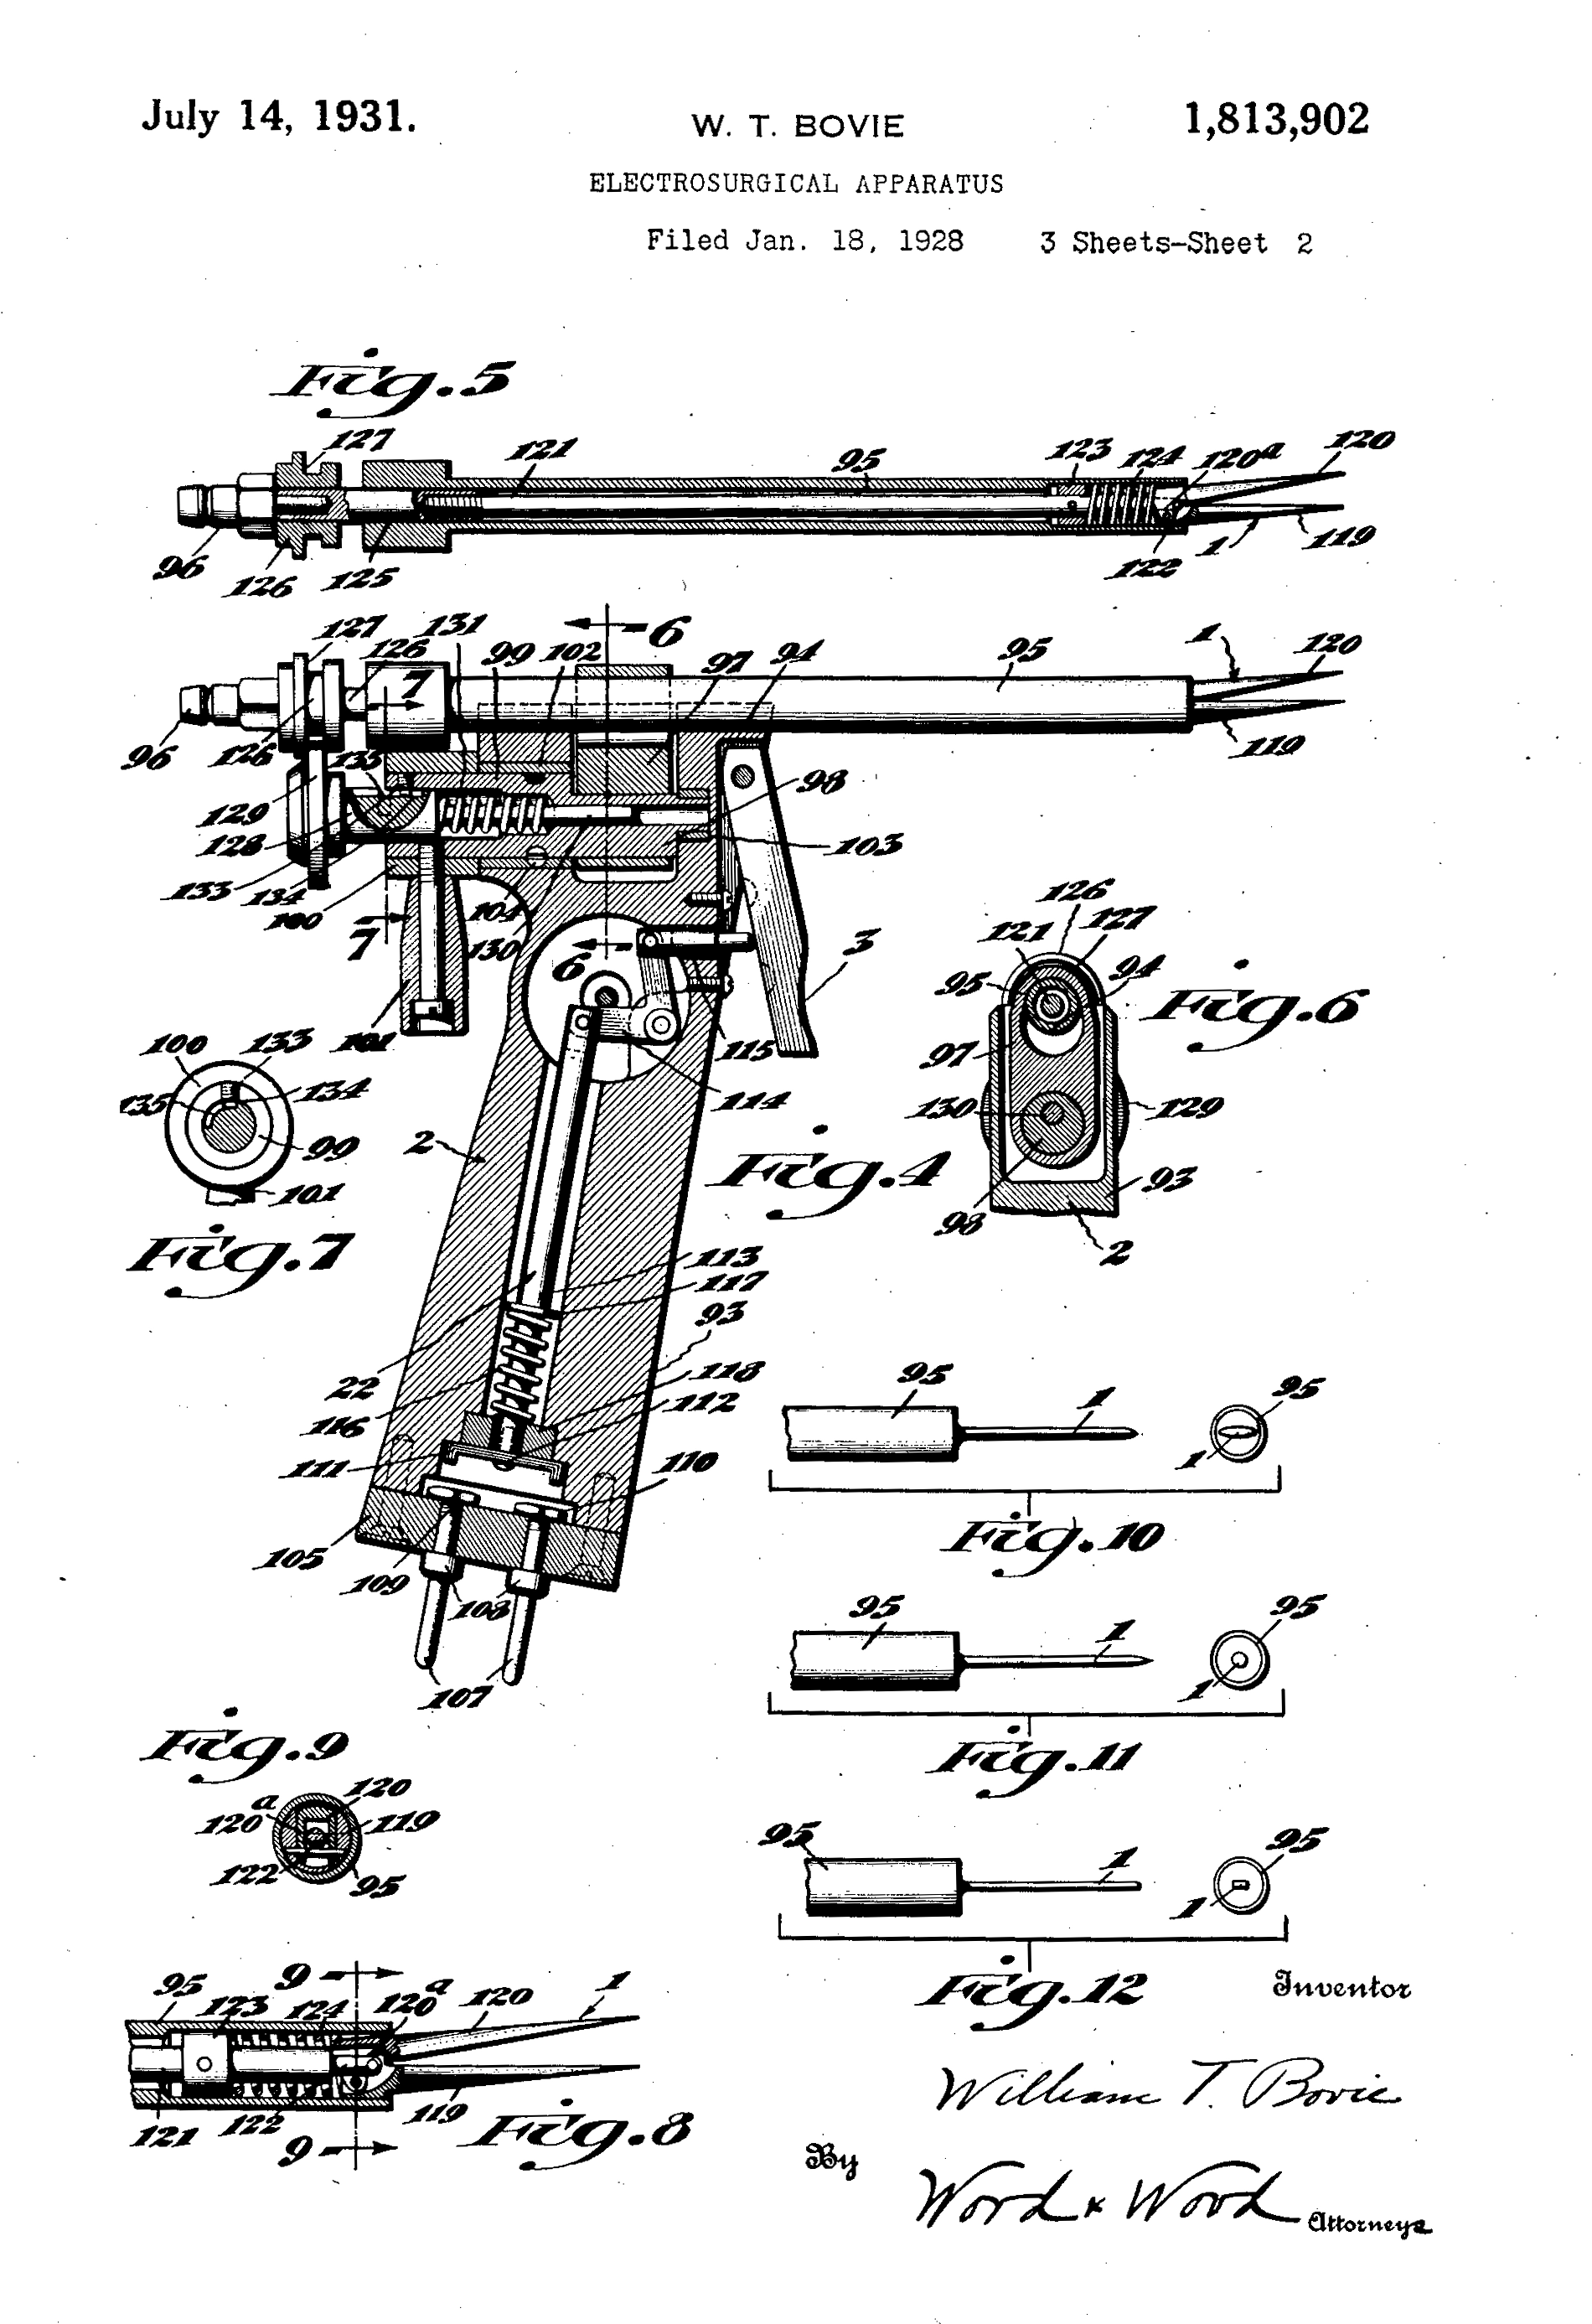 Patent diagram dated July 14, 1931 of an electrocautery surgery device shaped like a handgun. The diagram details the mechanisms and circuitry of the device. 